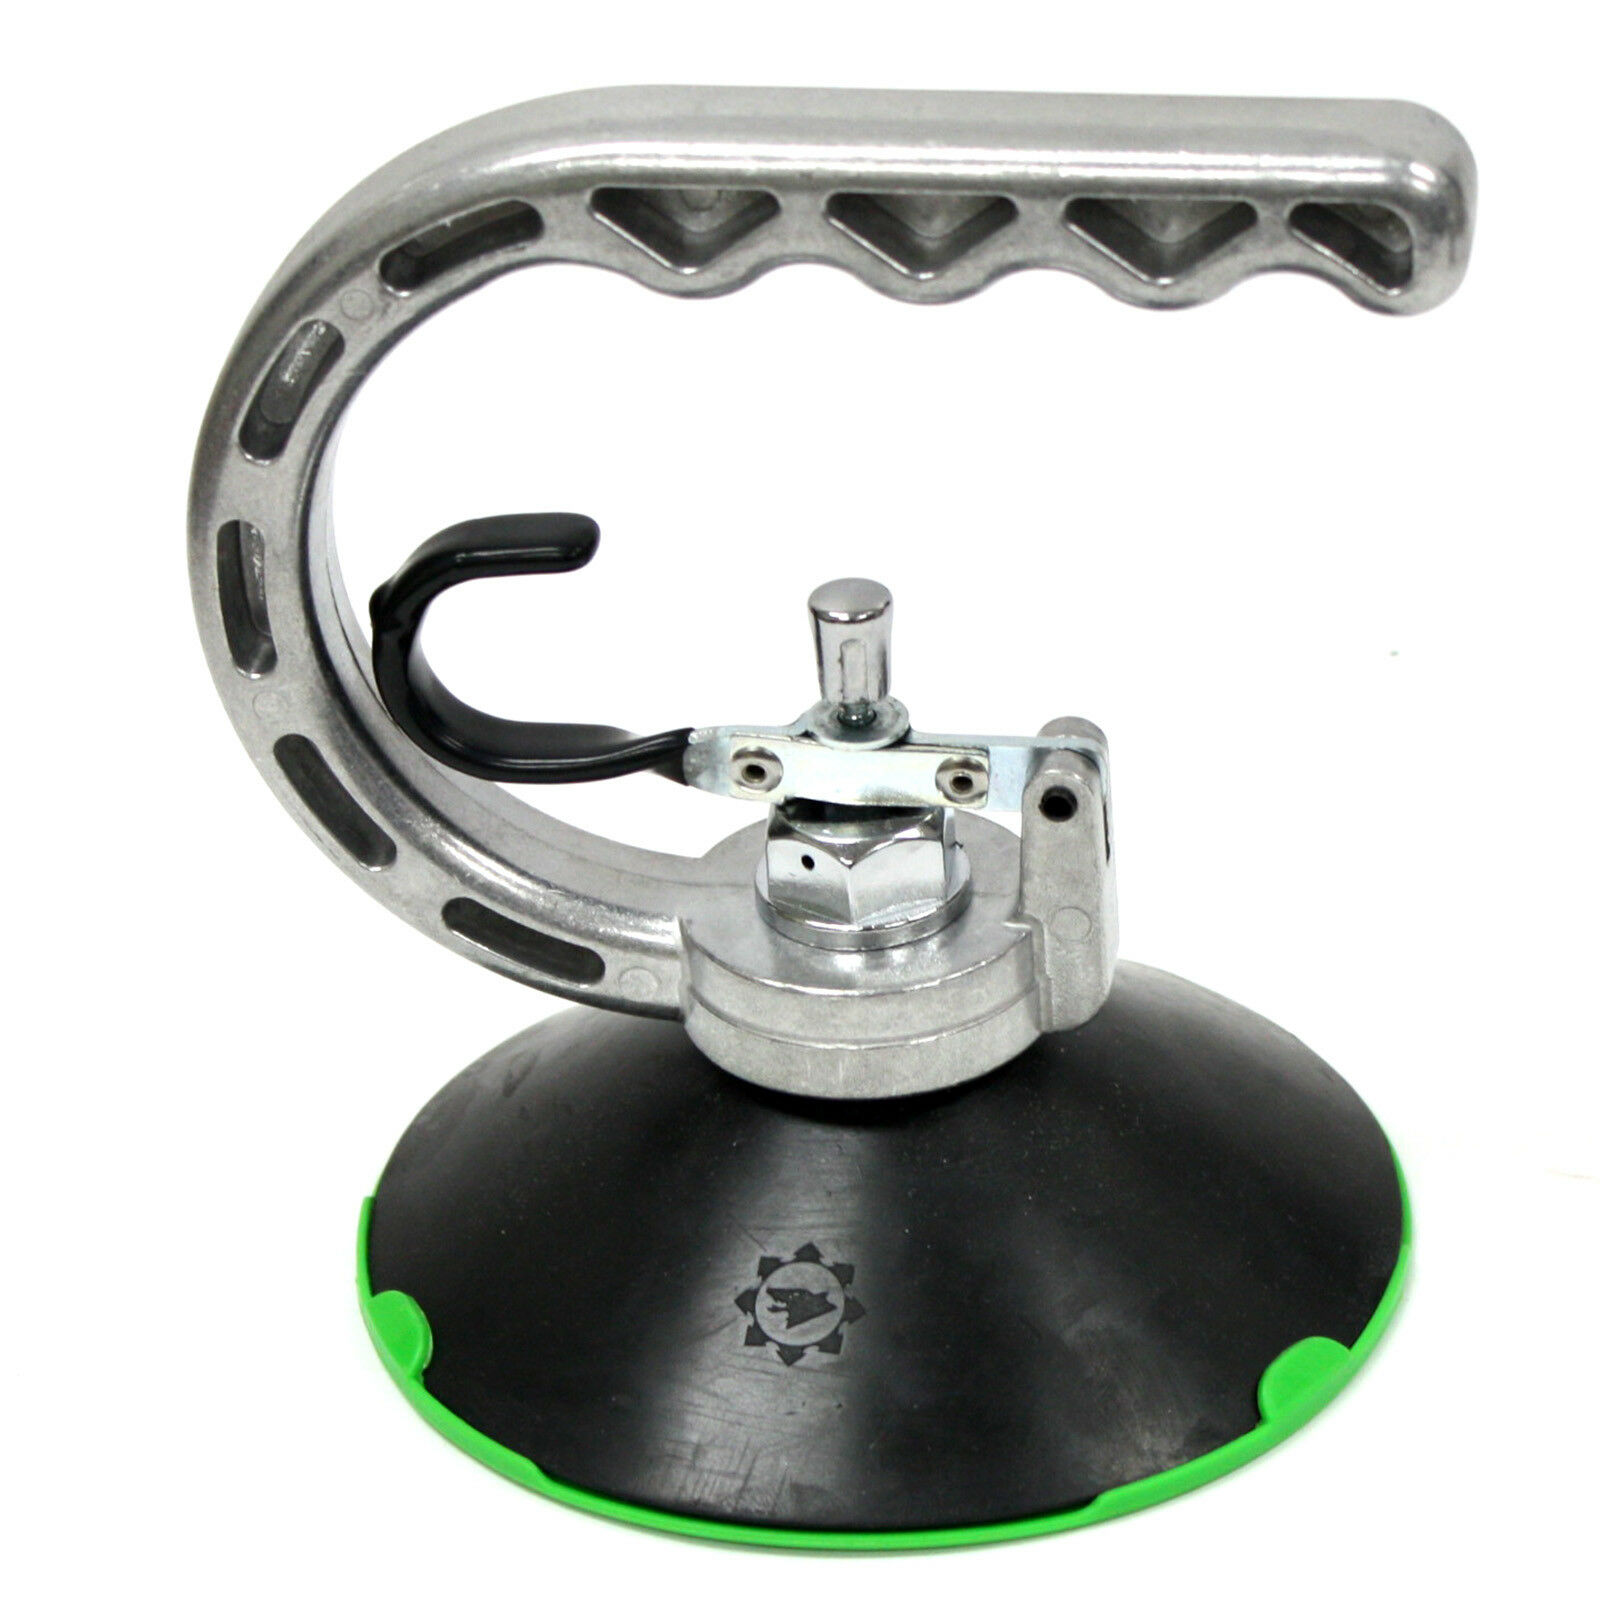 Details about   Large Suction Cup Glass Lifter Carrying Pad 35kg Single Dent Puller Repair